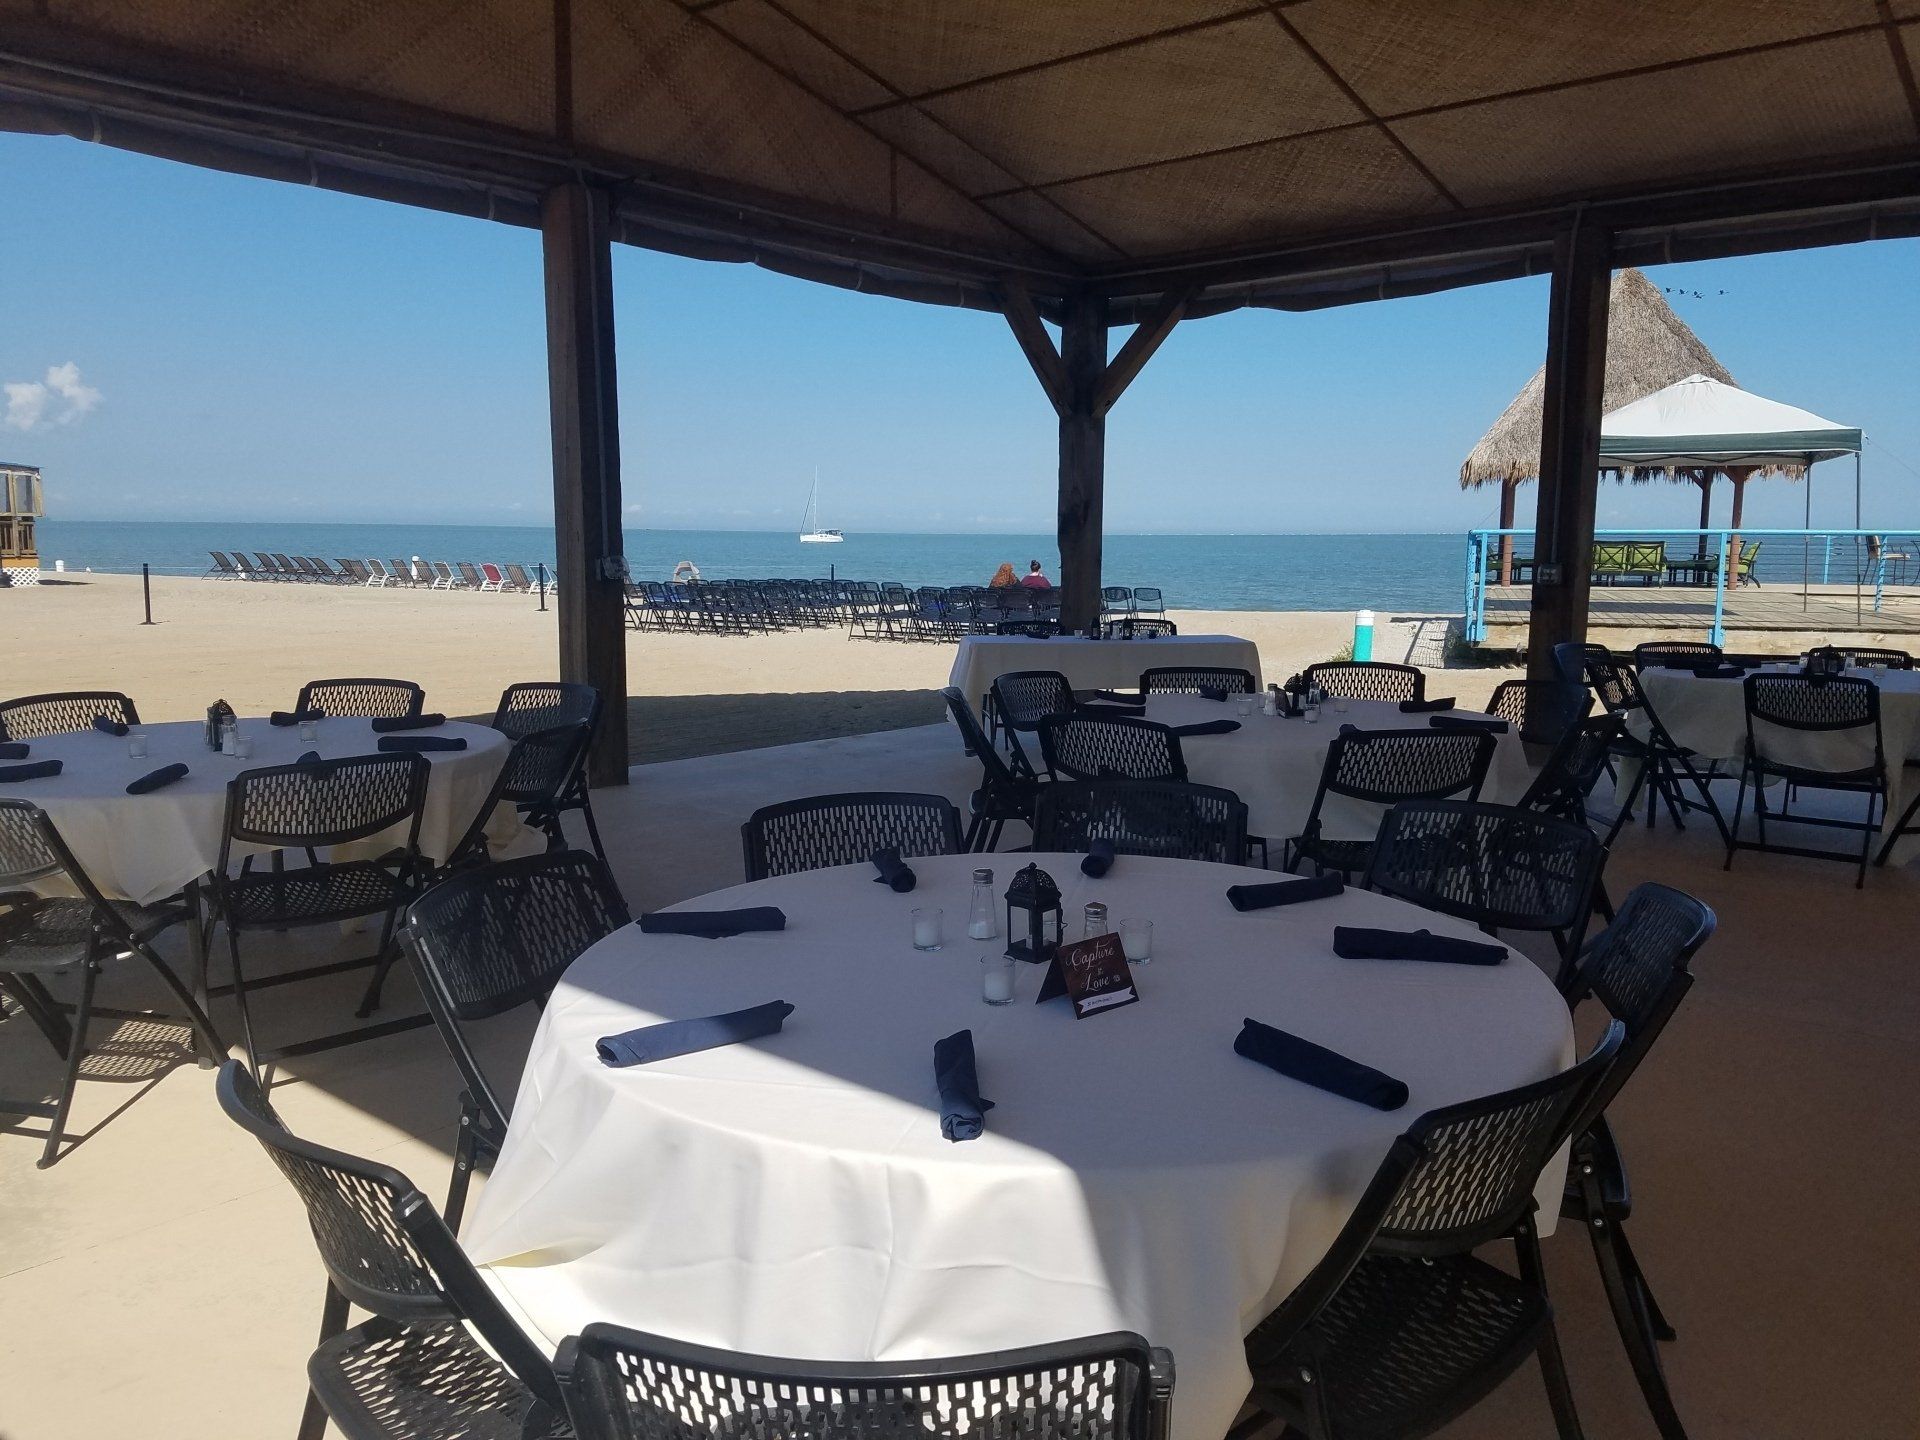 Large Group Event at Dock's Beach House, Port Clinton, Ohio